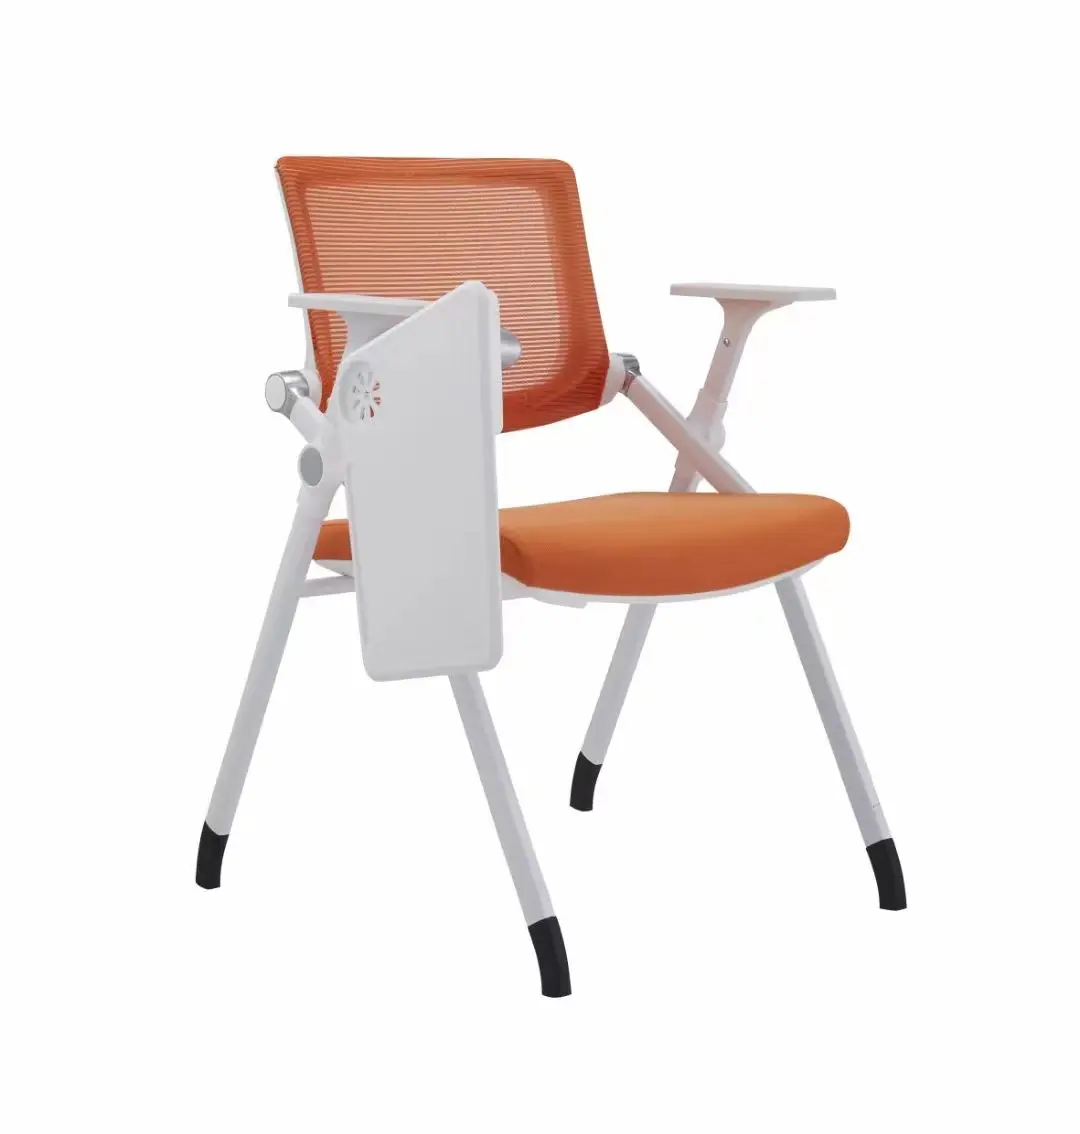 Modern Design Factory Price High Quality New School Classroom Student Office Meeting Room Study Desk Training Chair Writing Pad